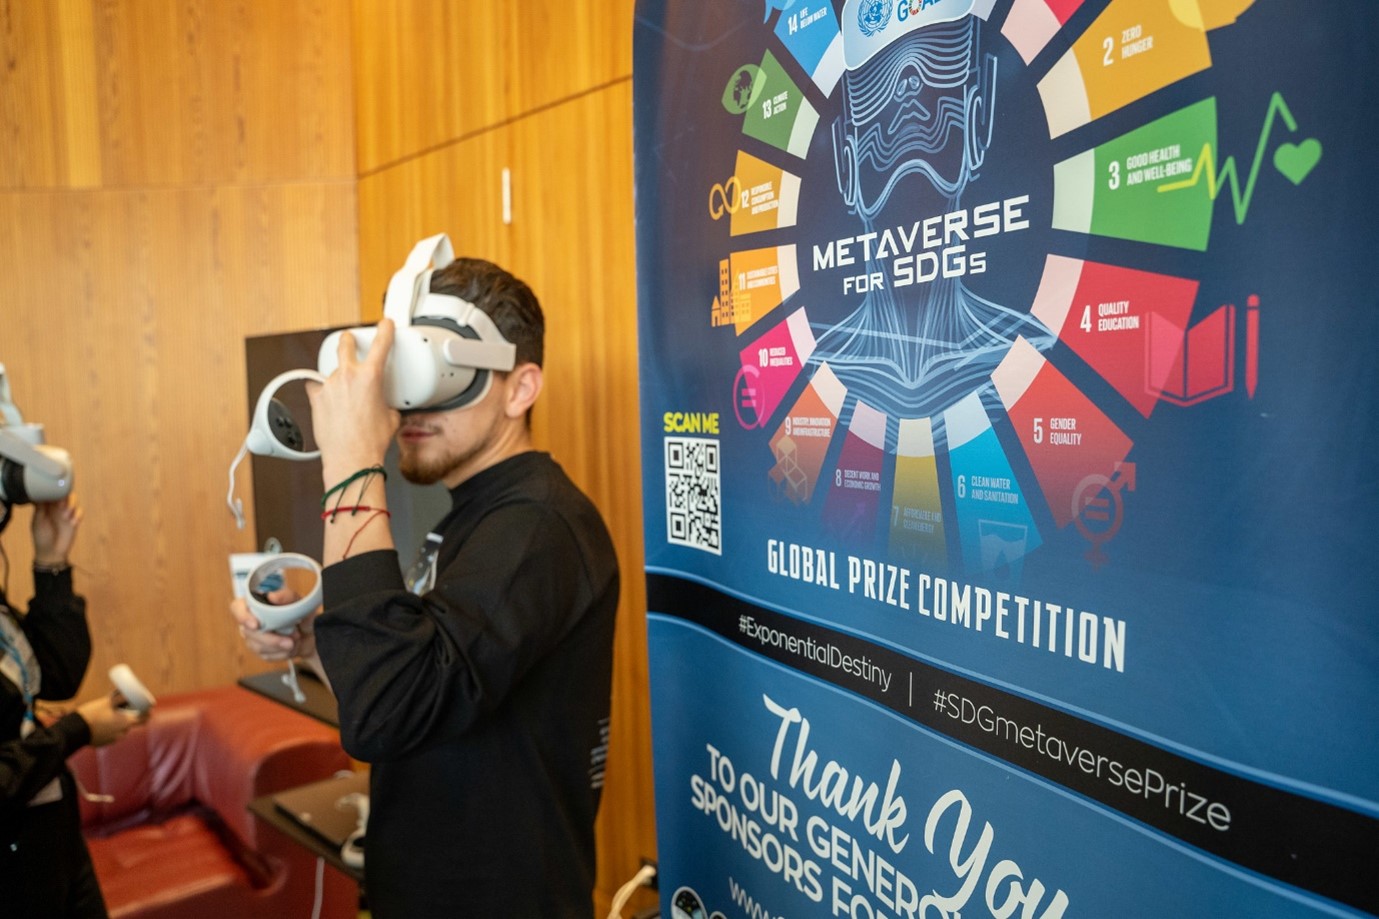 Metaverse 2030: Experiencing the SDGs in virtual reality featured image